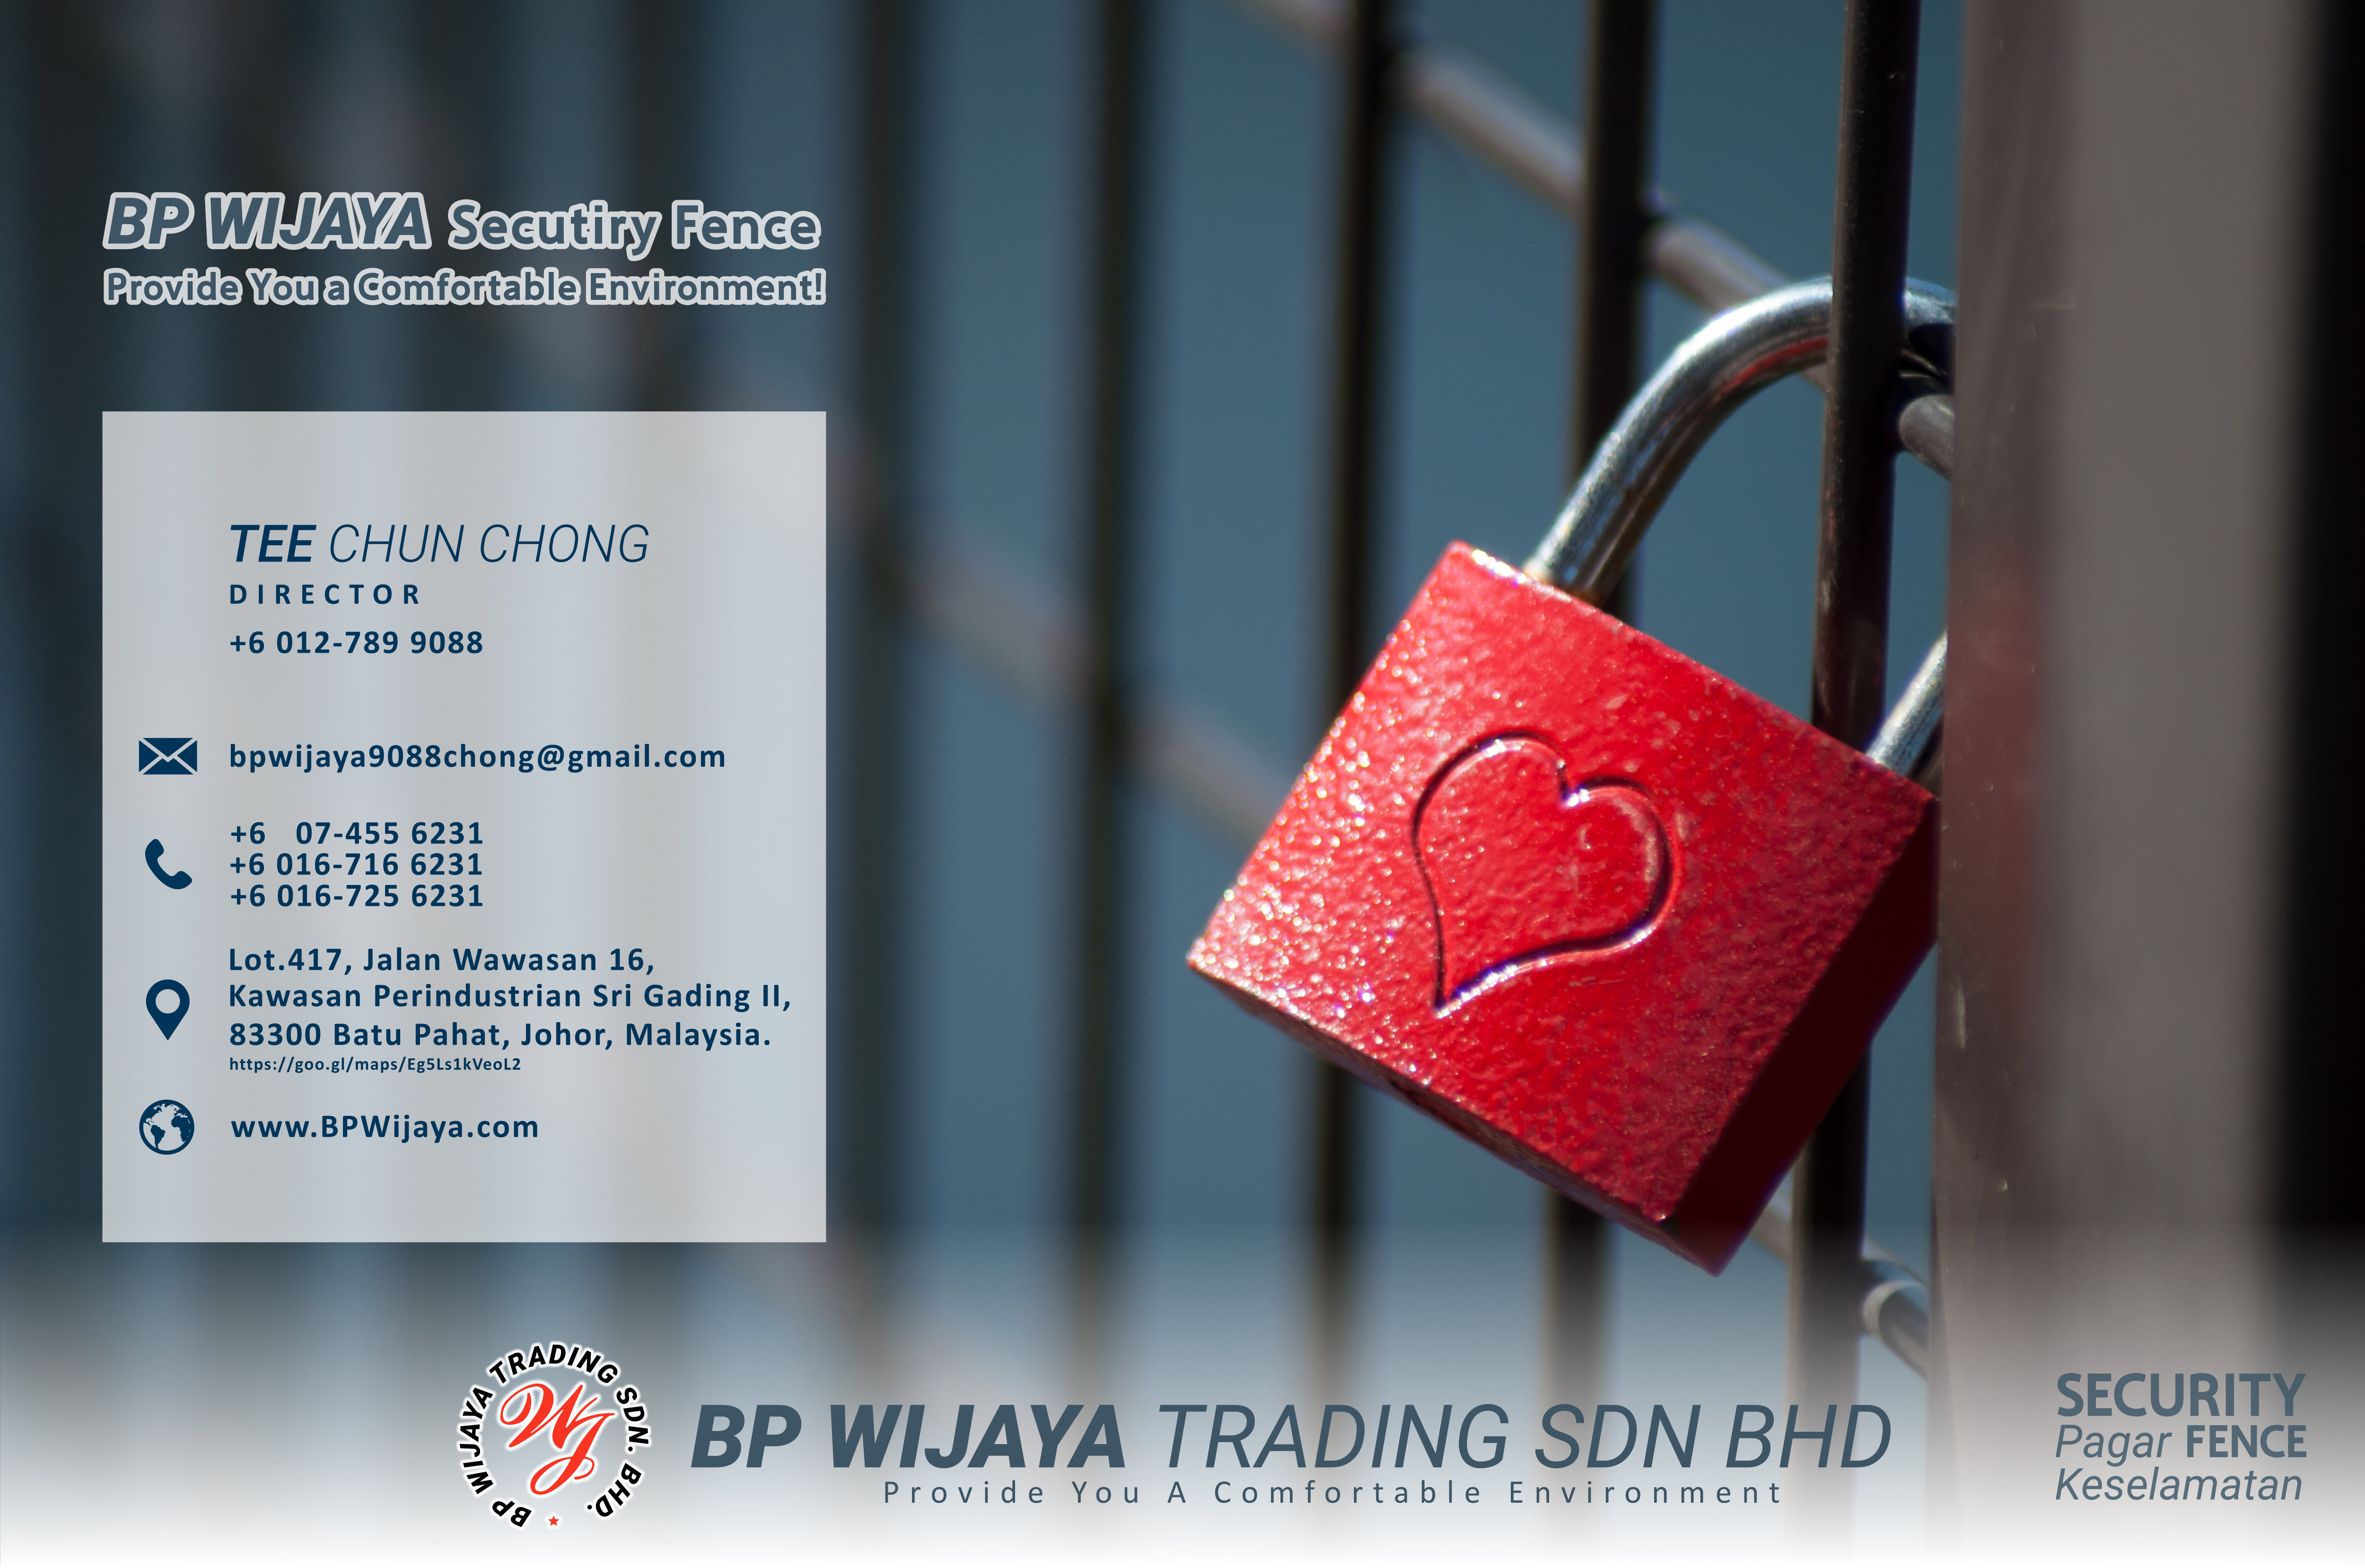 BP Wijaya Trading Sdn Bhd Fence Malaysia Selangor Kuala Lumpur manufacturer of safety fences building materials for housing construction site Security fencing factory fence house fence A01-020